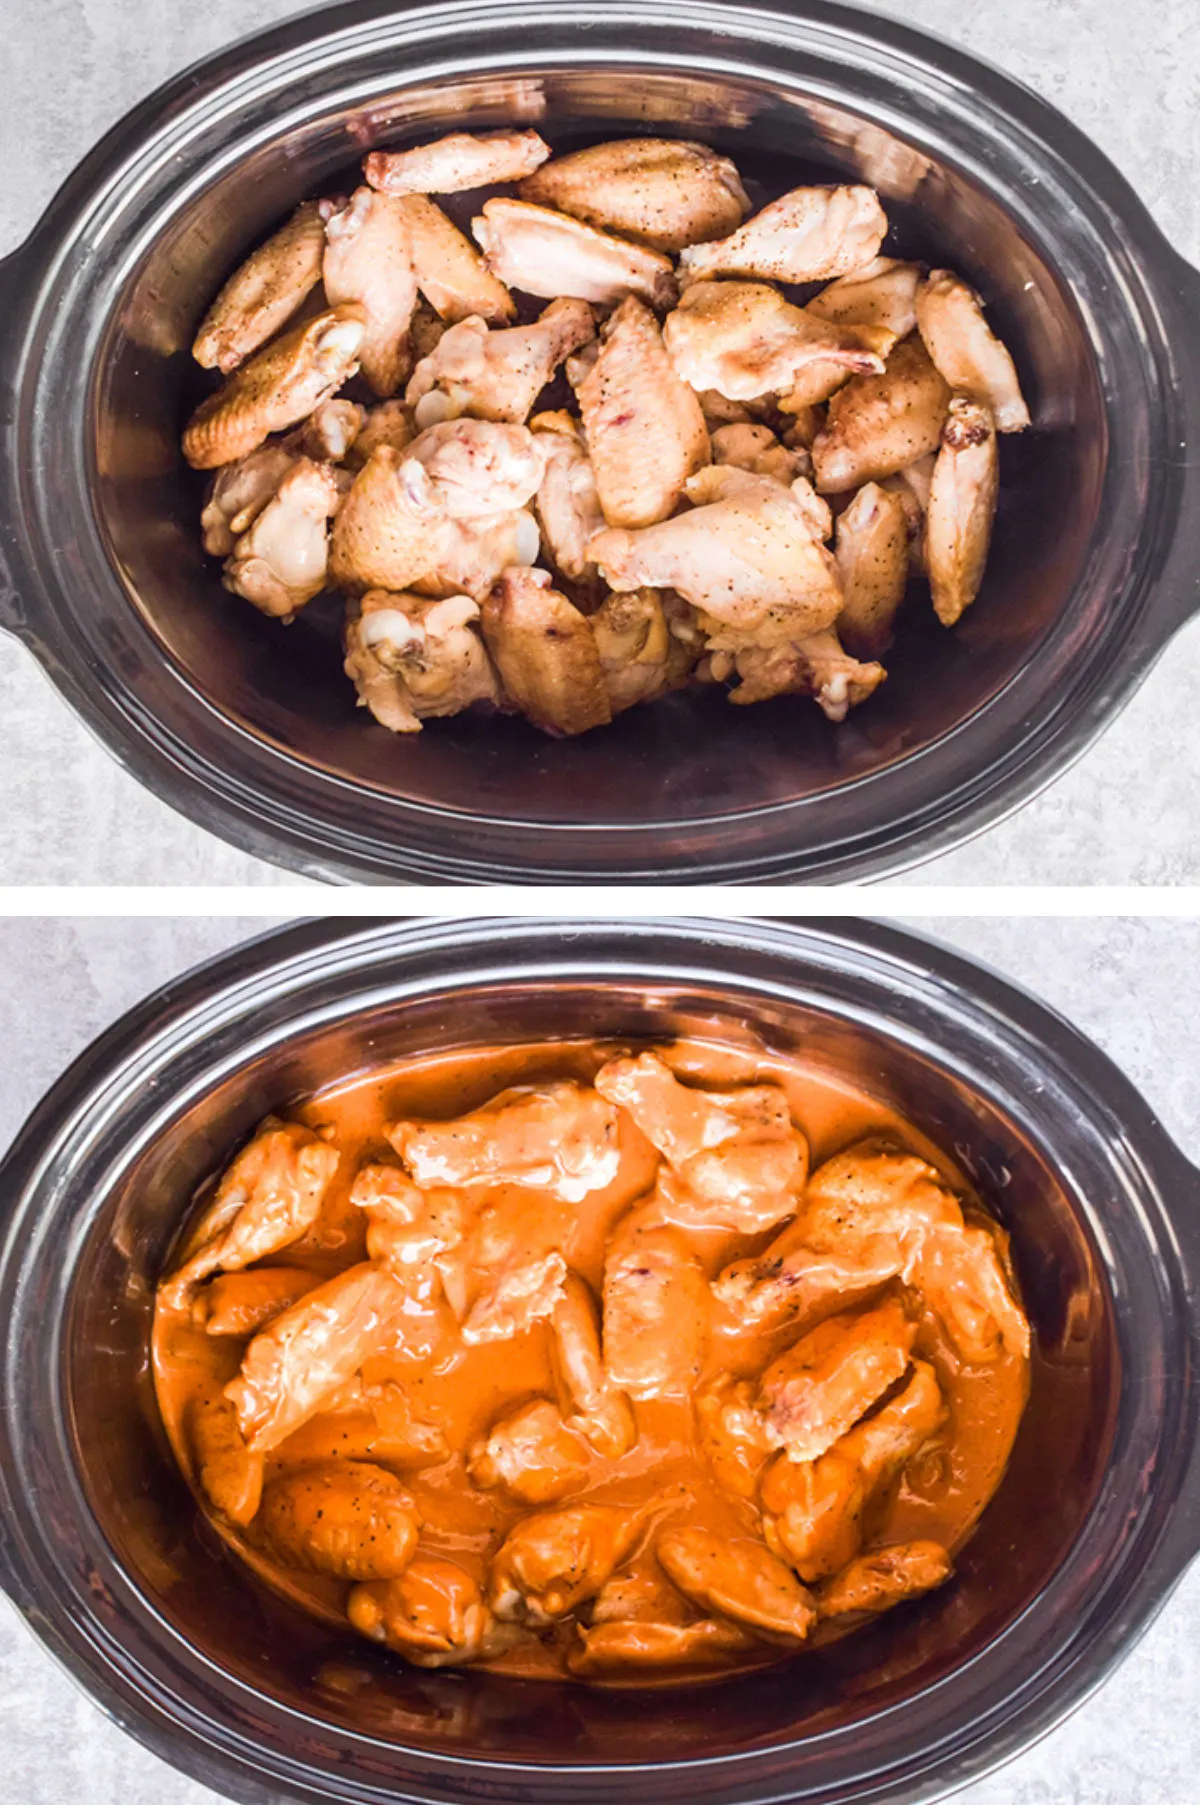 Two overhead images in one: 1. Baked chicken wings are in a slow cooker. 2. Sauce is added to the slow cooker. 